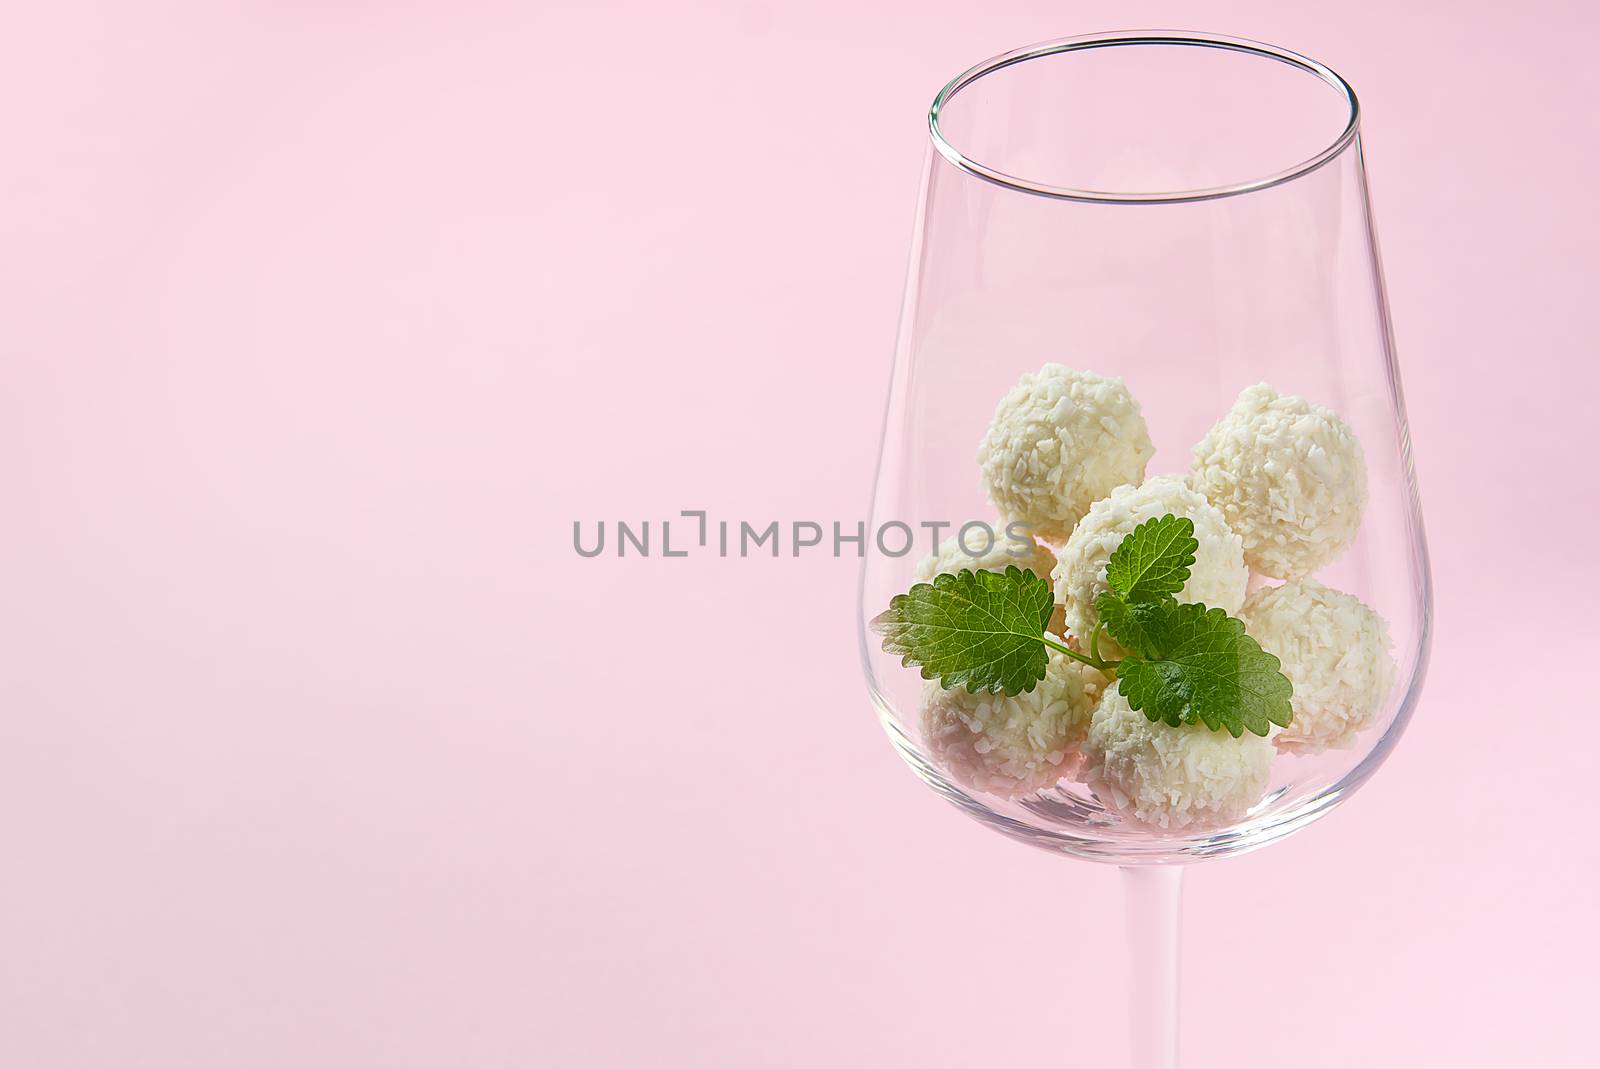 White Coconut Truffles in wine glass with mint leave. wine glass with Coconut cookies on pink background with copy space